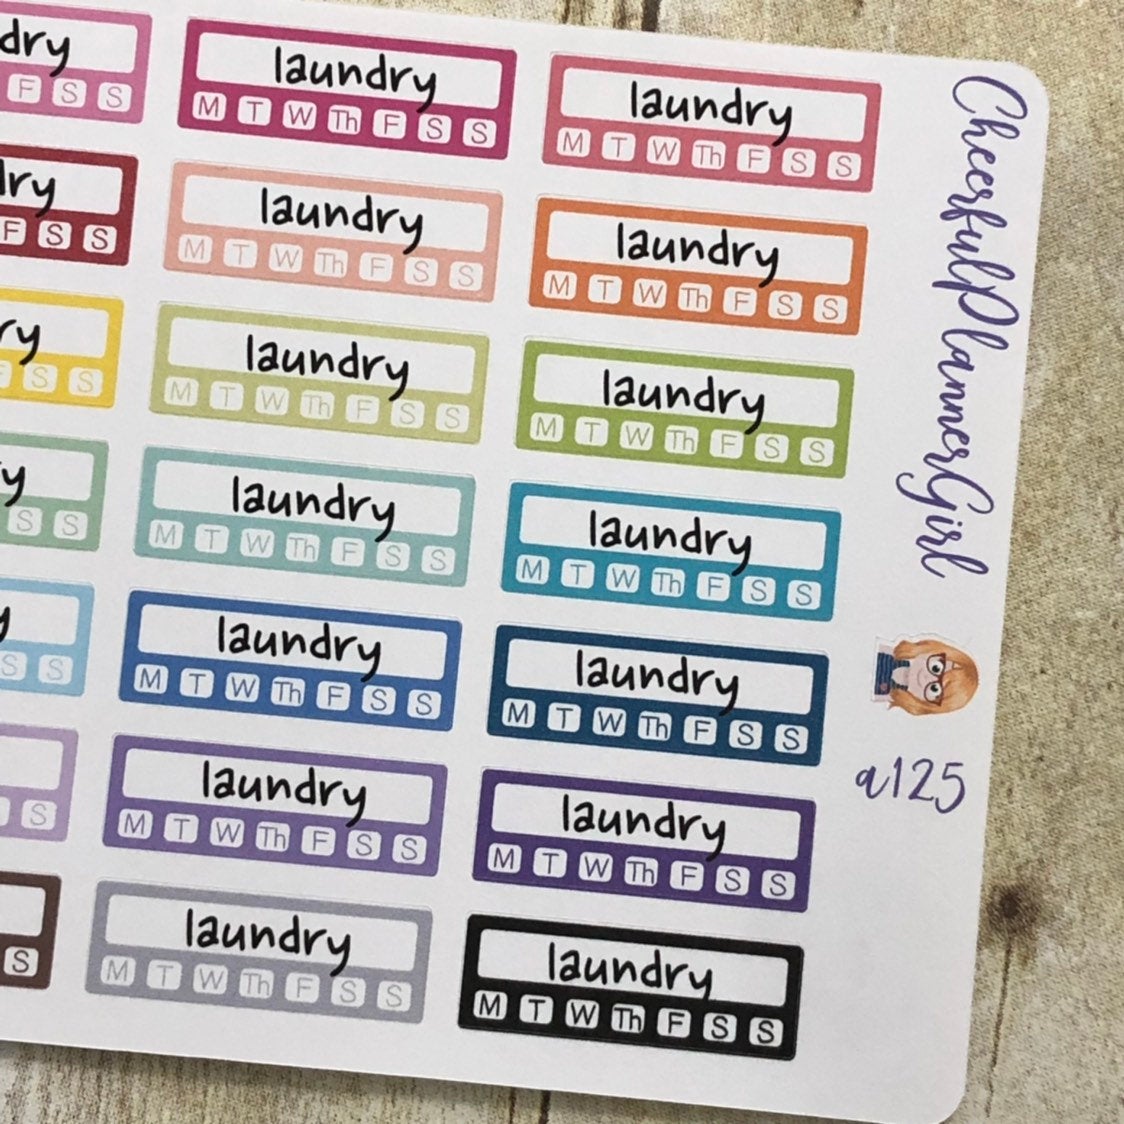 Laundry Daily Habit Tracker Planner Stickers